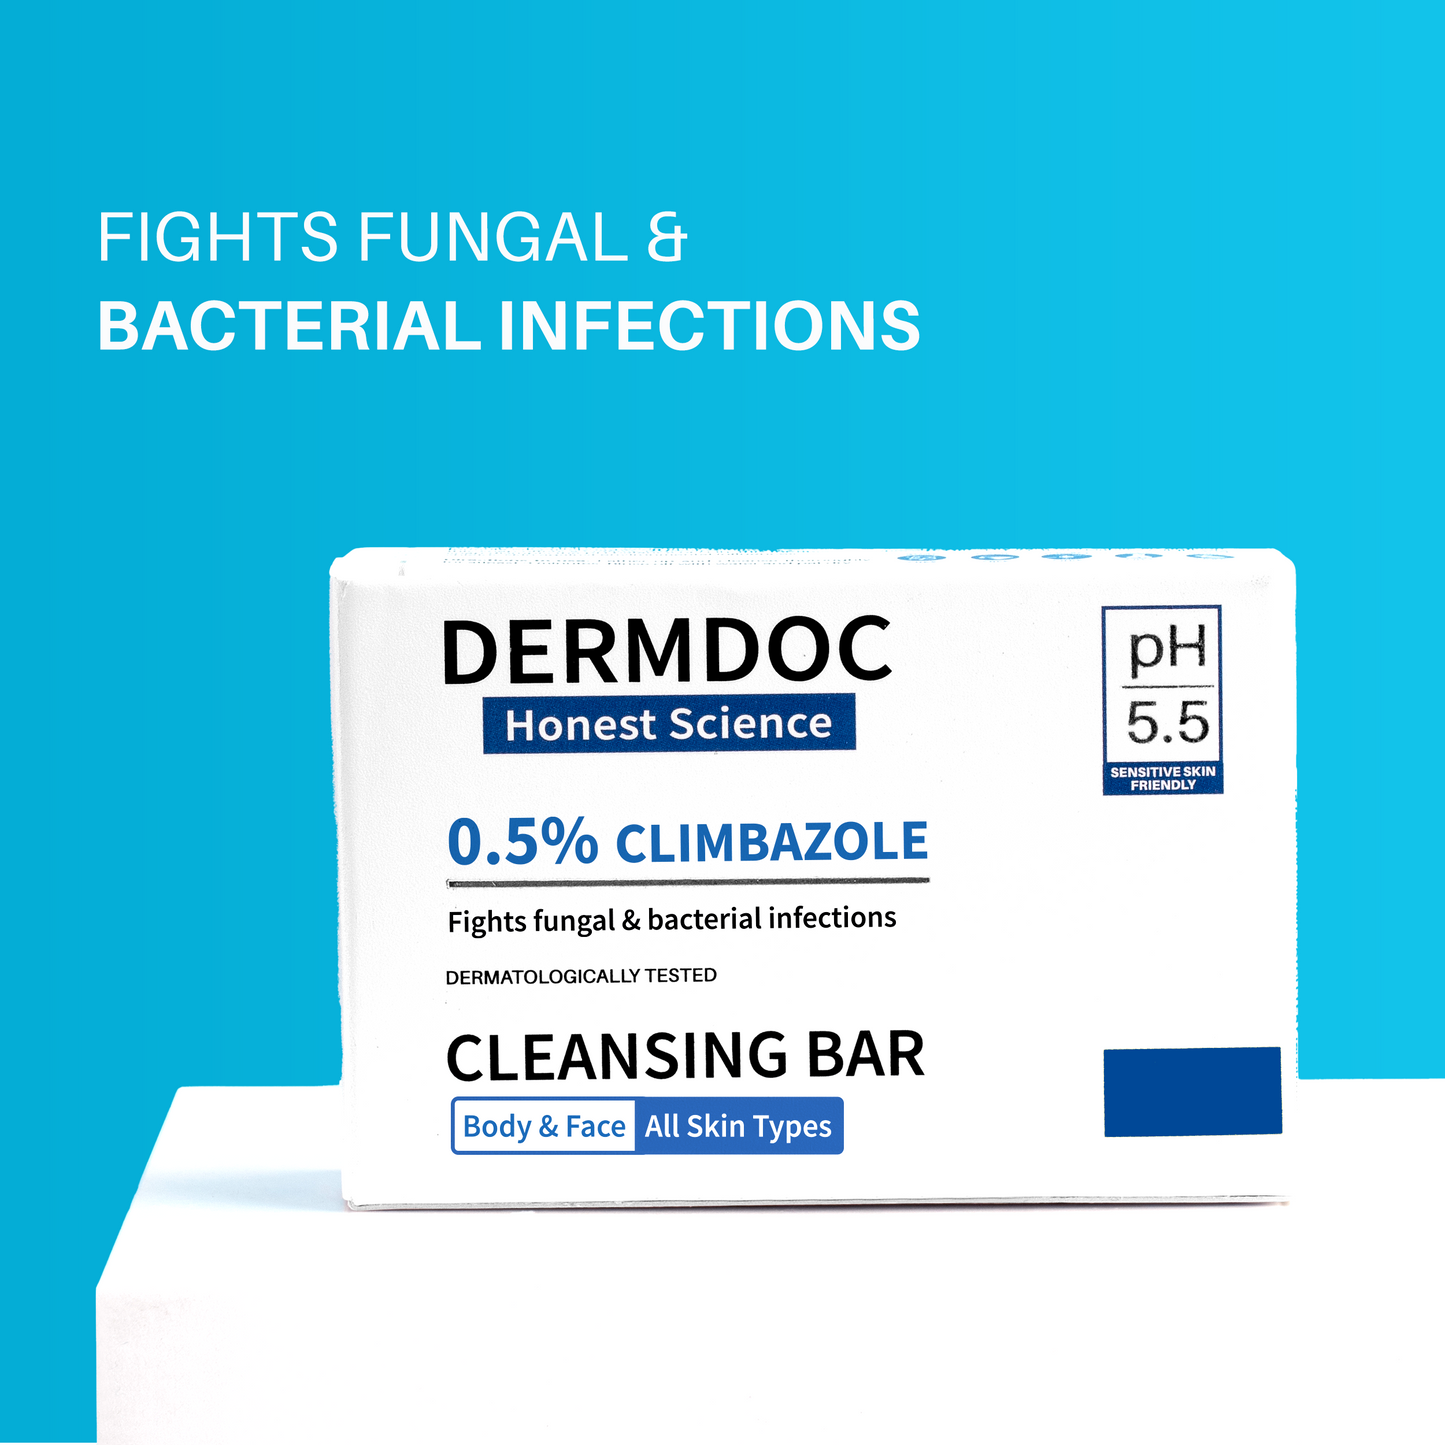 DermDoc by Purplle Anti Fungal 0.5% Climbazole Cleansing Bar (75g) | gentle deep cleansing bar | antifungal cleansing bar for skin